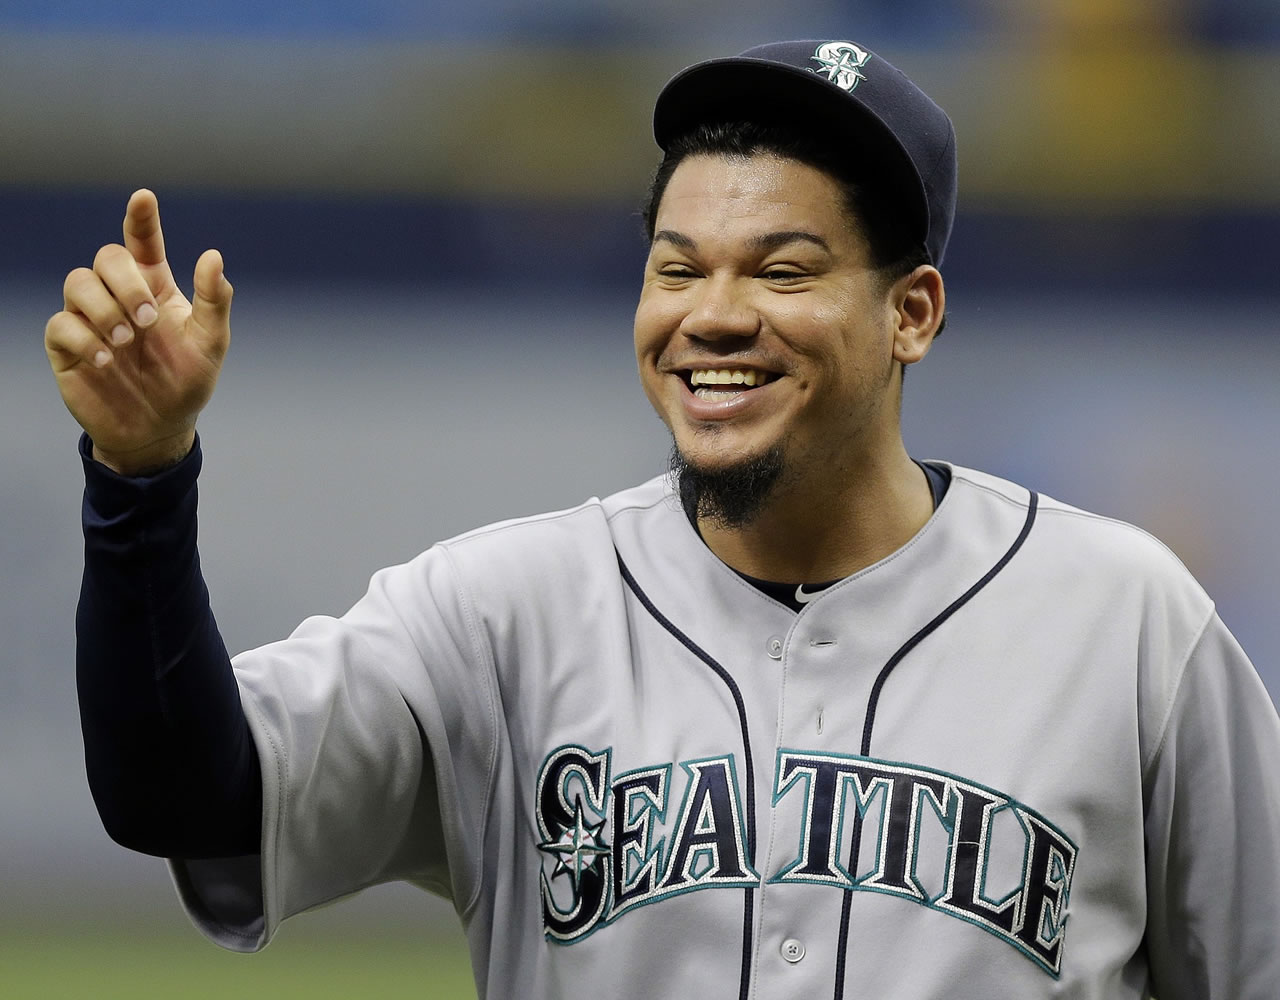 Seattle Mariners starting pitcher Felix Hernandez reacts as he in congratulated by teammates after his complete game shutout of the Tampa Bay Rays during a baseball game Wednesday, May 27, 2015, in St. Petersburg, Fla.  The Mariners won the game 3-0.